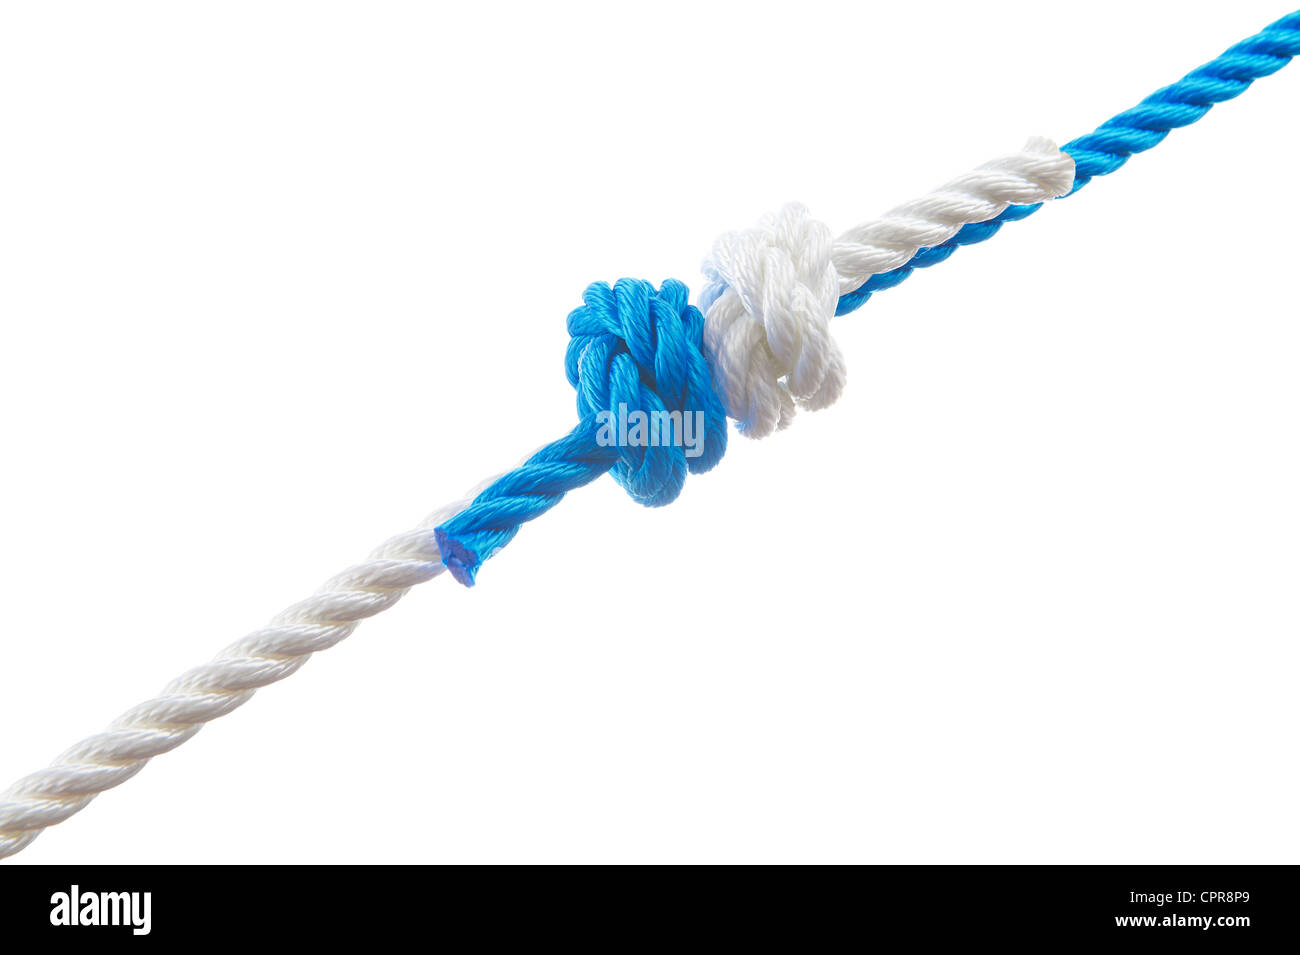 Double fisherman's knot isolated on white background Stock Photo